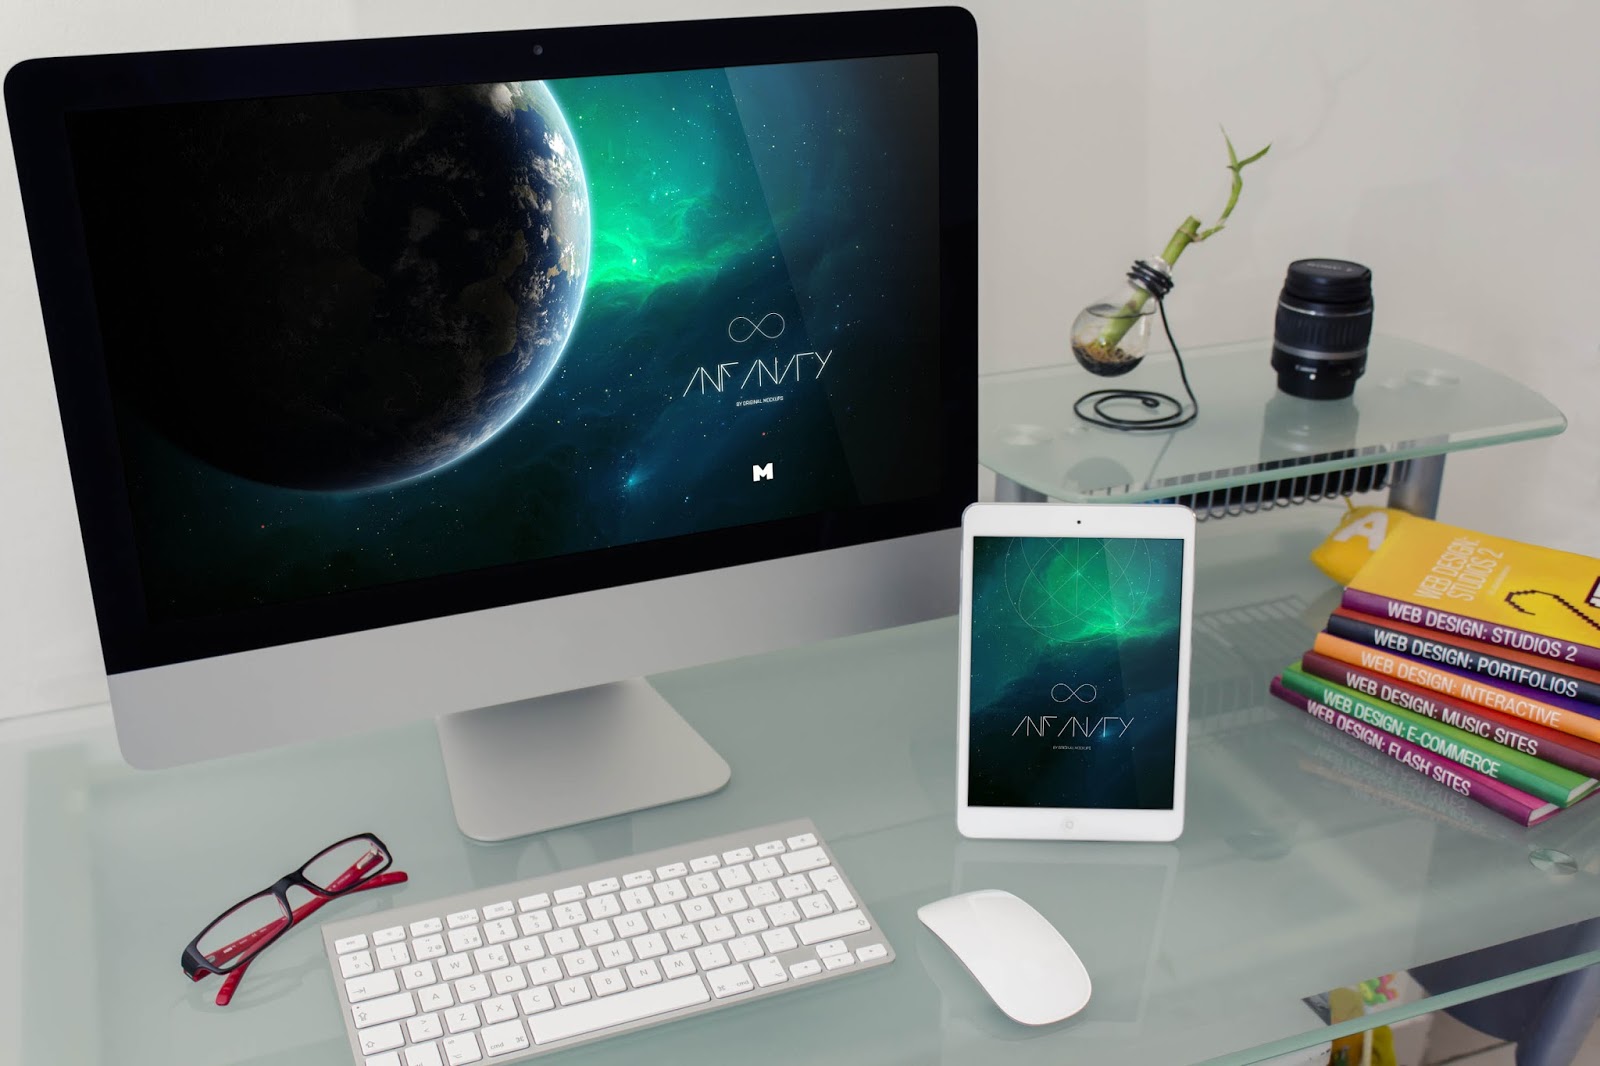 Download Devices and UI Mockup - Free Resource for Graphic Design